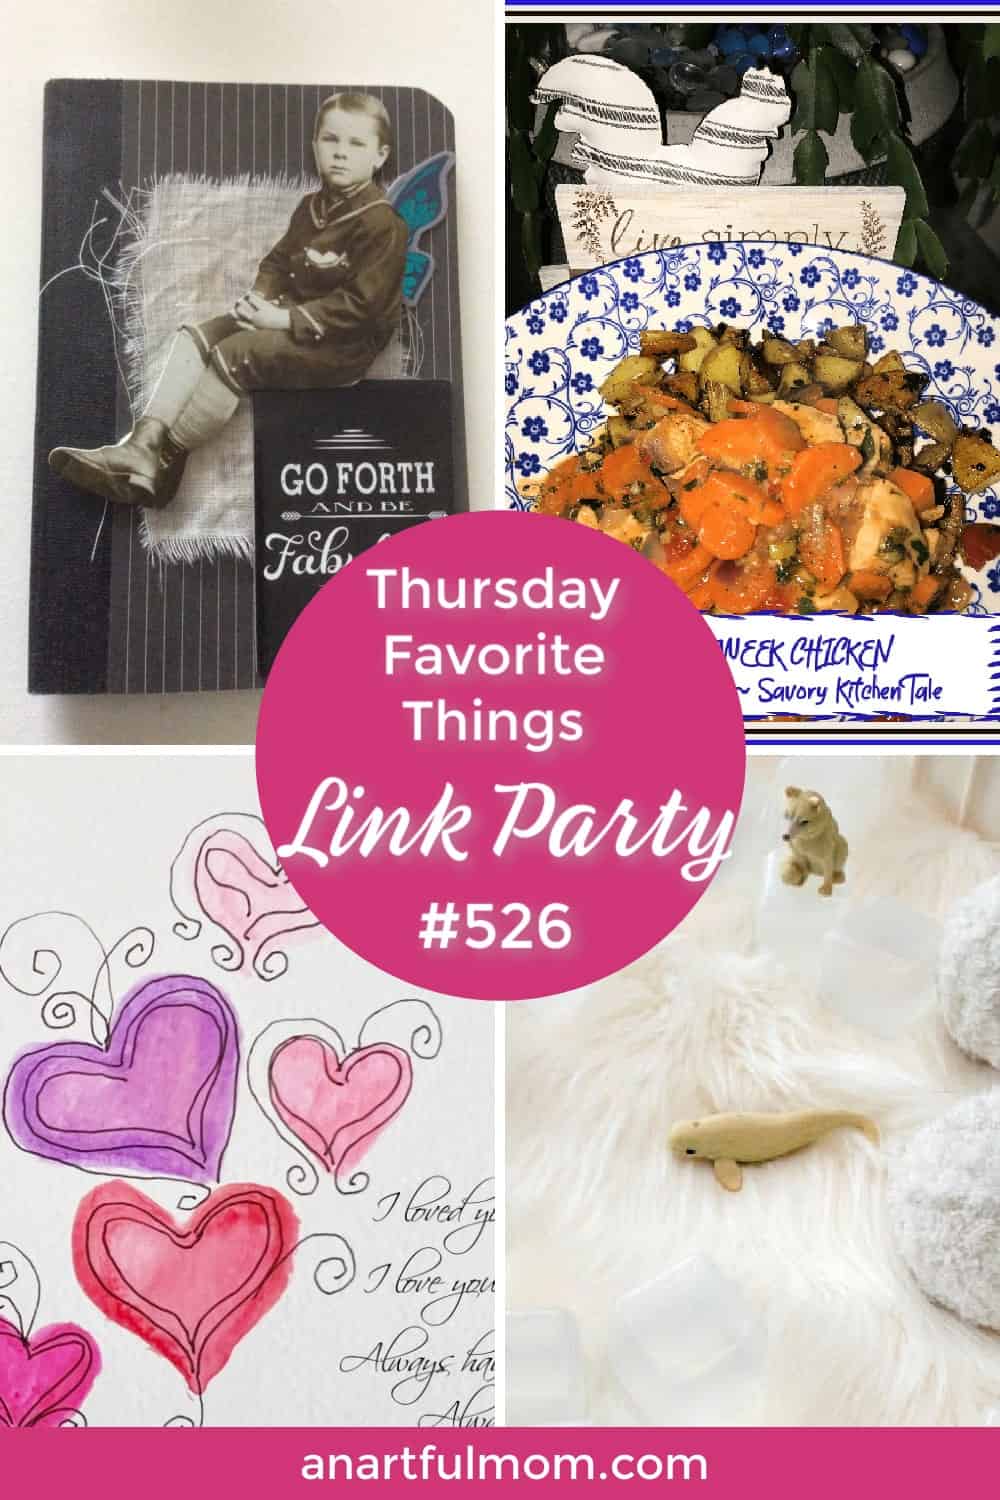 Thursday Favorite Things (TFT) Link Party #526